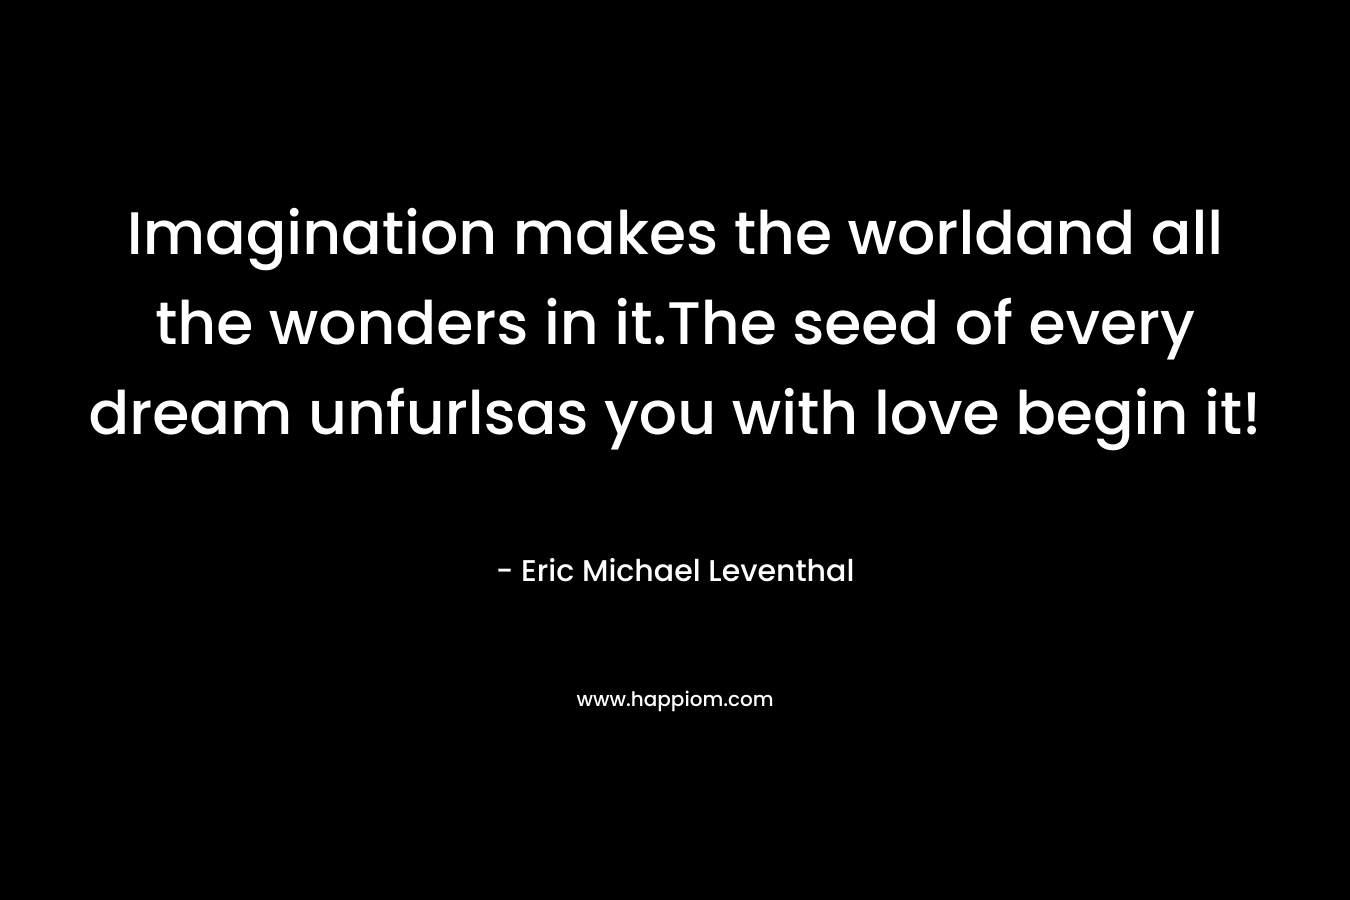 Imagination makes the worldand all the wonders in it.The seed of every dream unfurlsas you with love begin it! – Eric Michael Leventhal